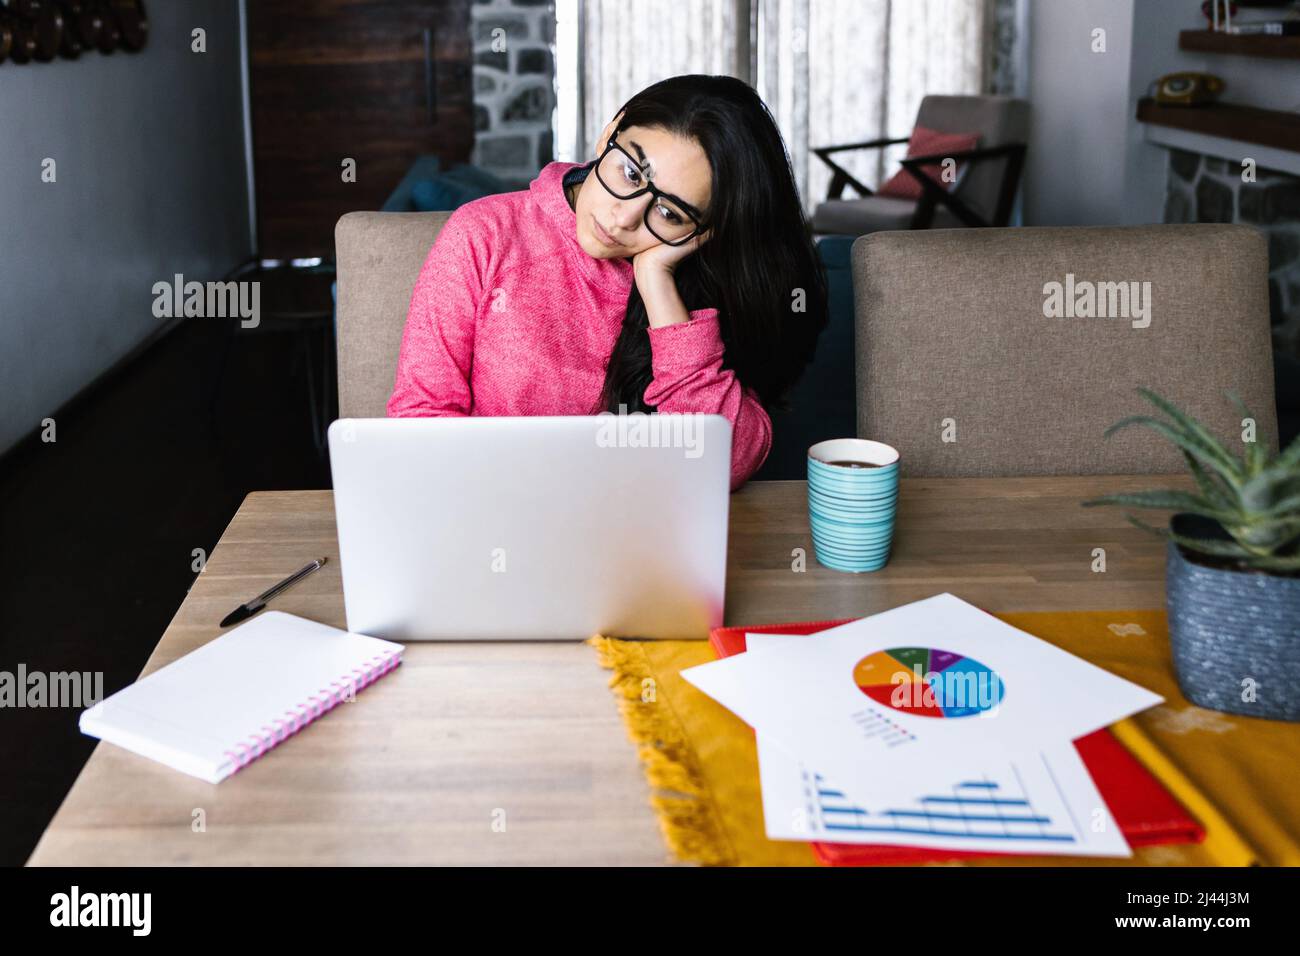 Latin woman in front of her laptop staring at the screen, bored, sleepy, tired in a home office concept in Mexico Latin America Stock Photo